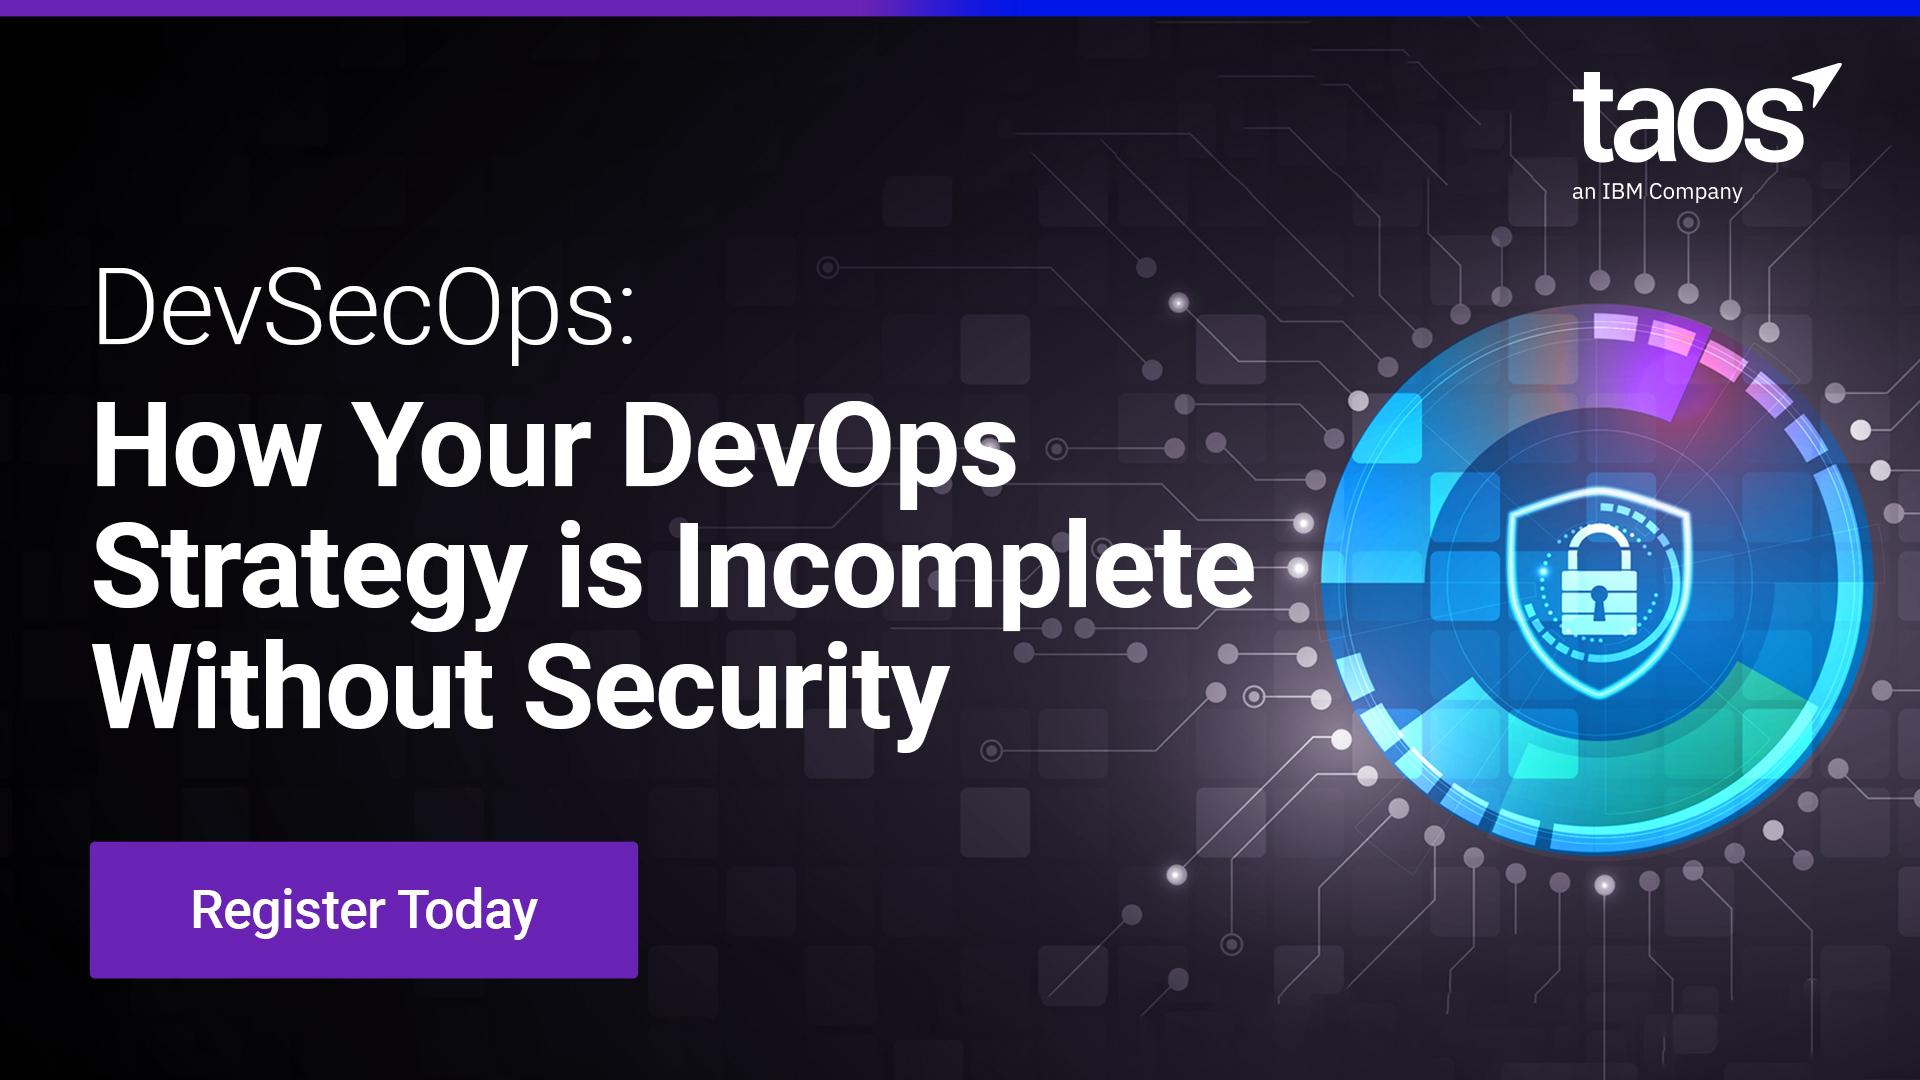 DevSecOps: How Your DevOps Strategy is Incomplete Without Security